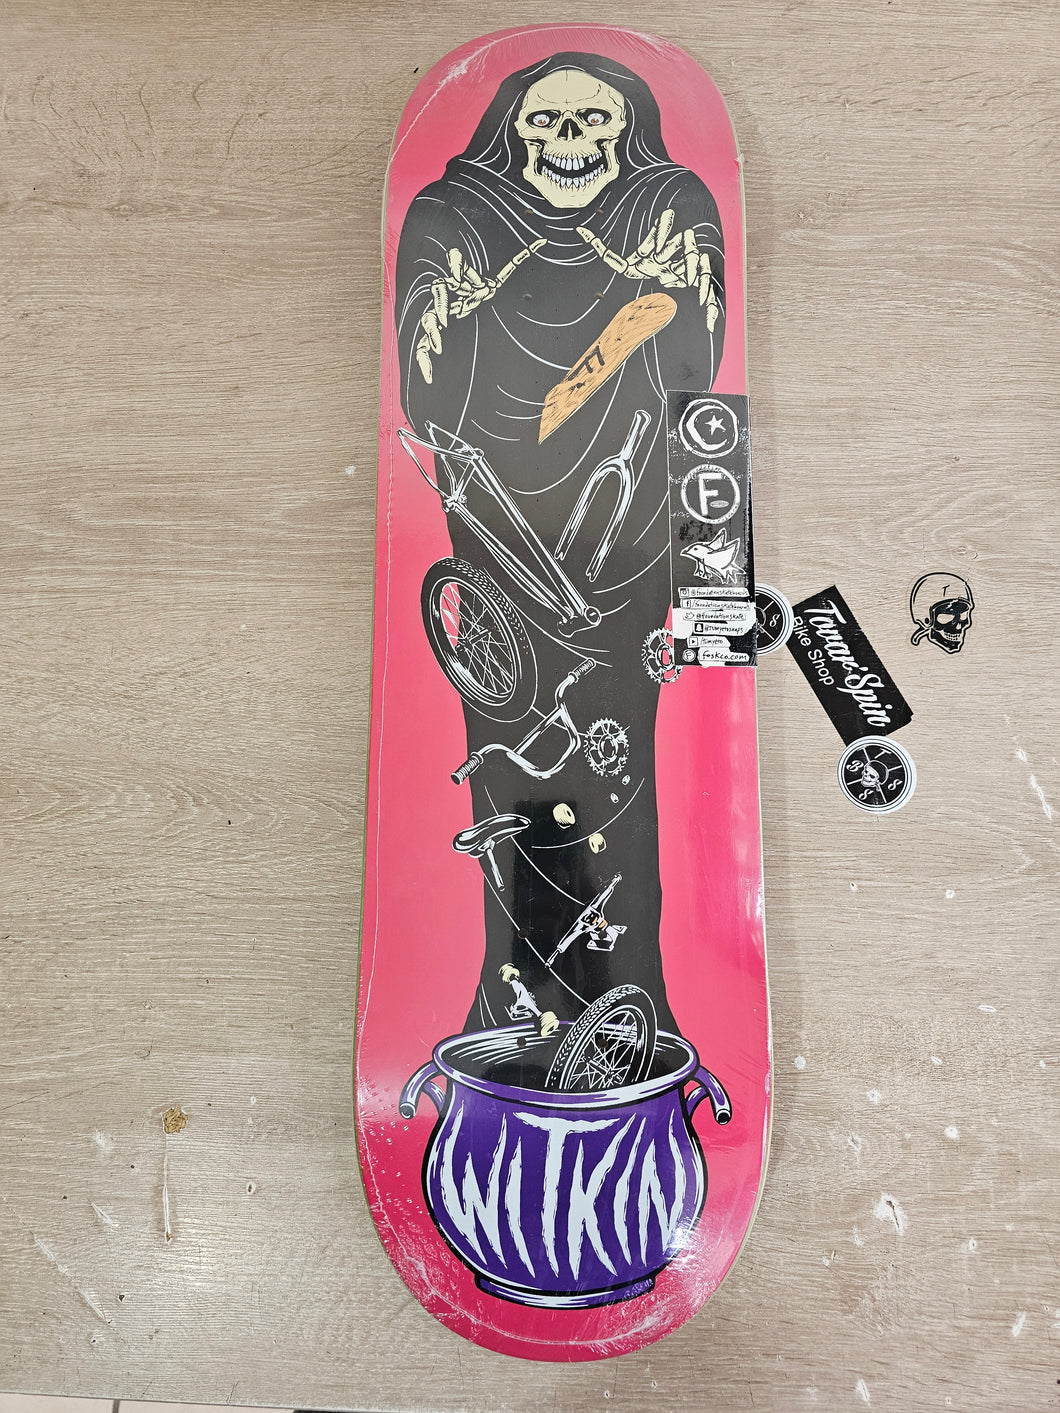 Cult x Dylan witkin skateboard